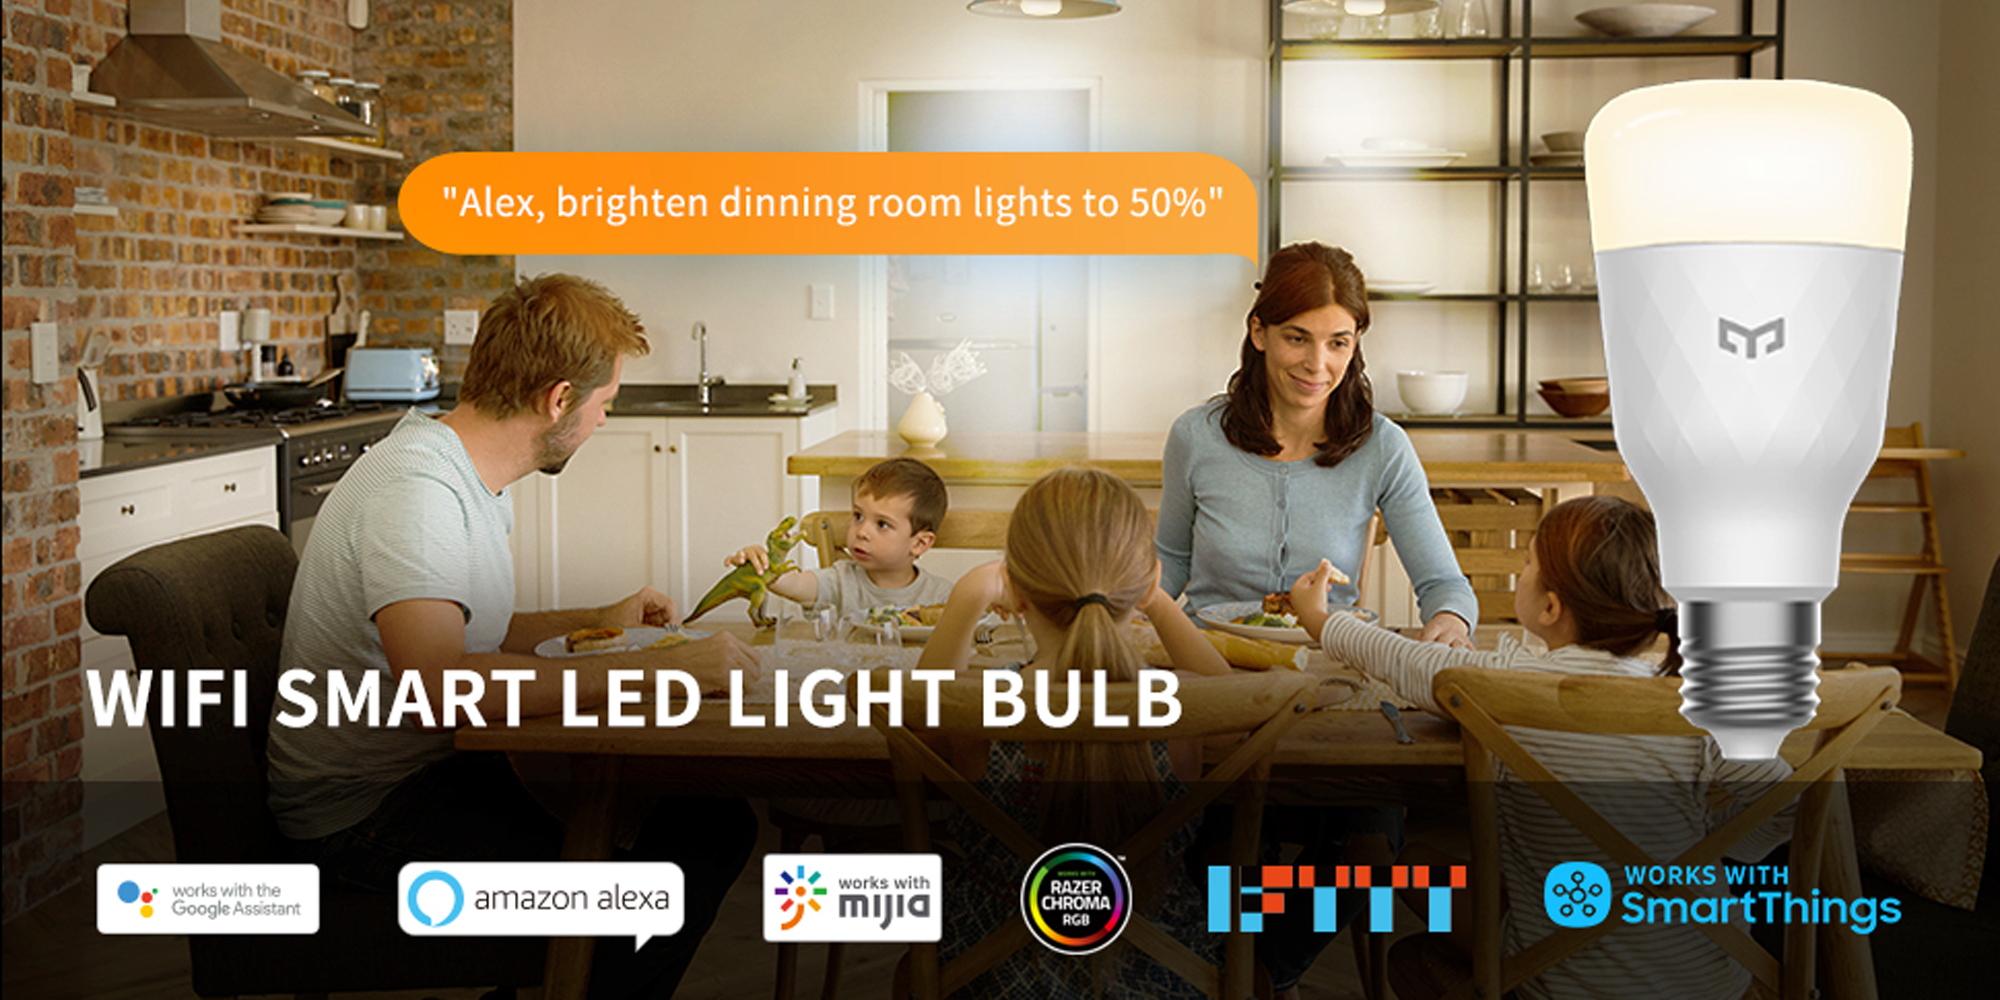 Yeelight Smart LED Bulb W3: Dimmable Smart Bulb with 900 Lumens, Compatible With Google Assistant, Amazon Alexa And Samsung